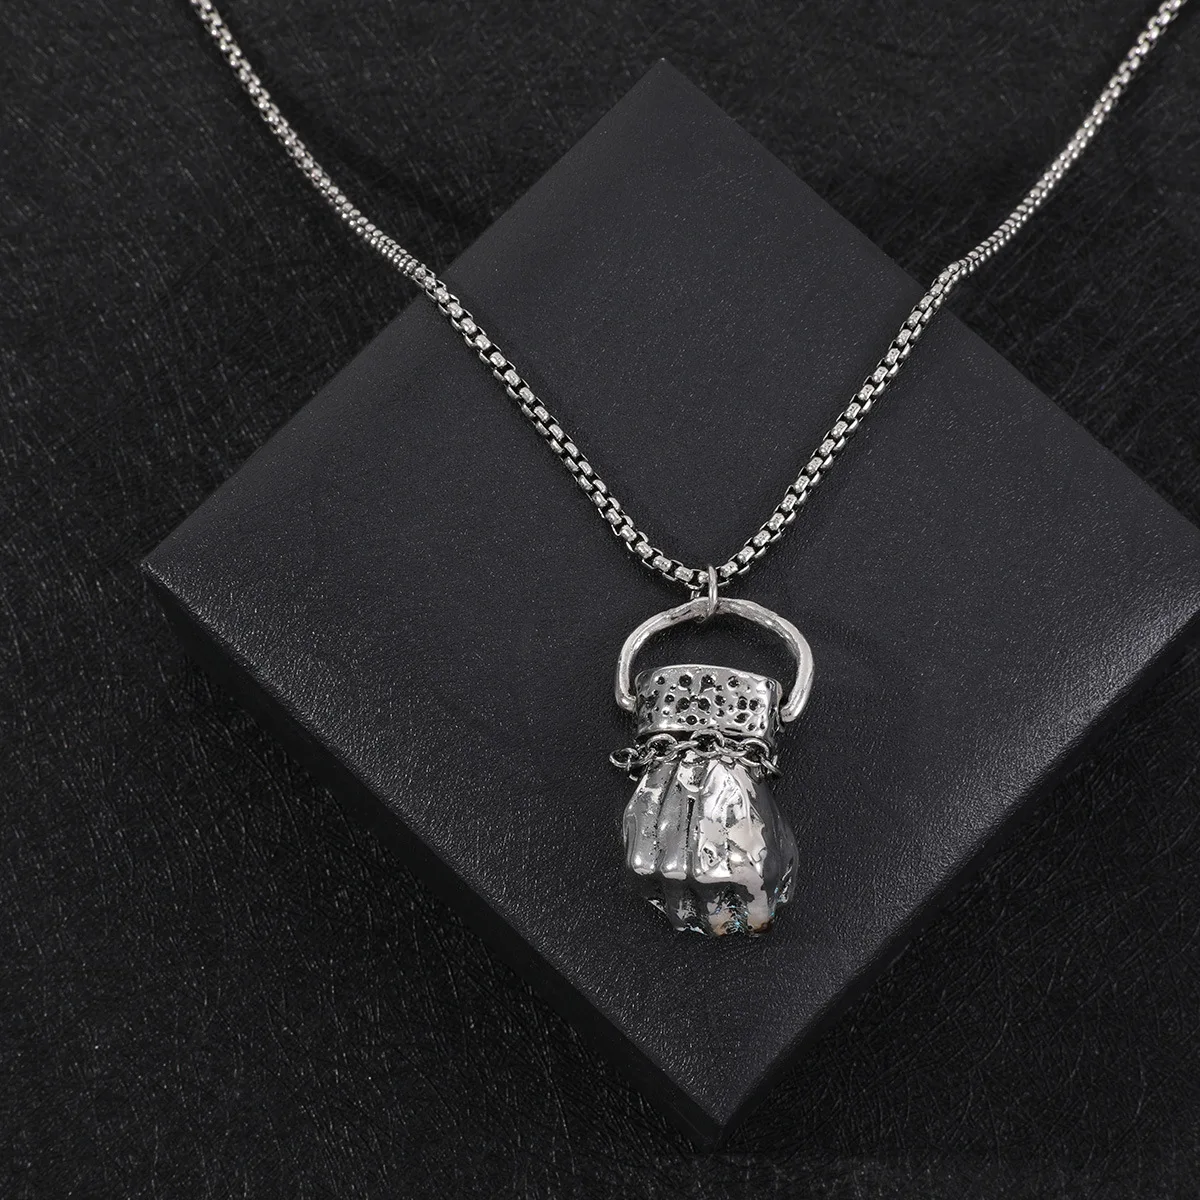 Necklace Brave Fist Power Holds The Fist Necklace Chain Pendants Punk Rock Hip Hop for Male Boy Fashion Jewelry Gift